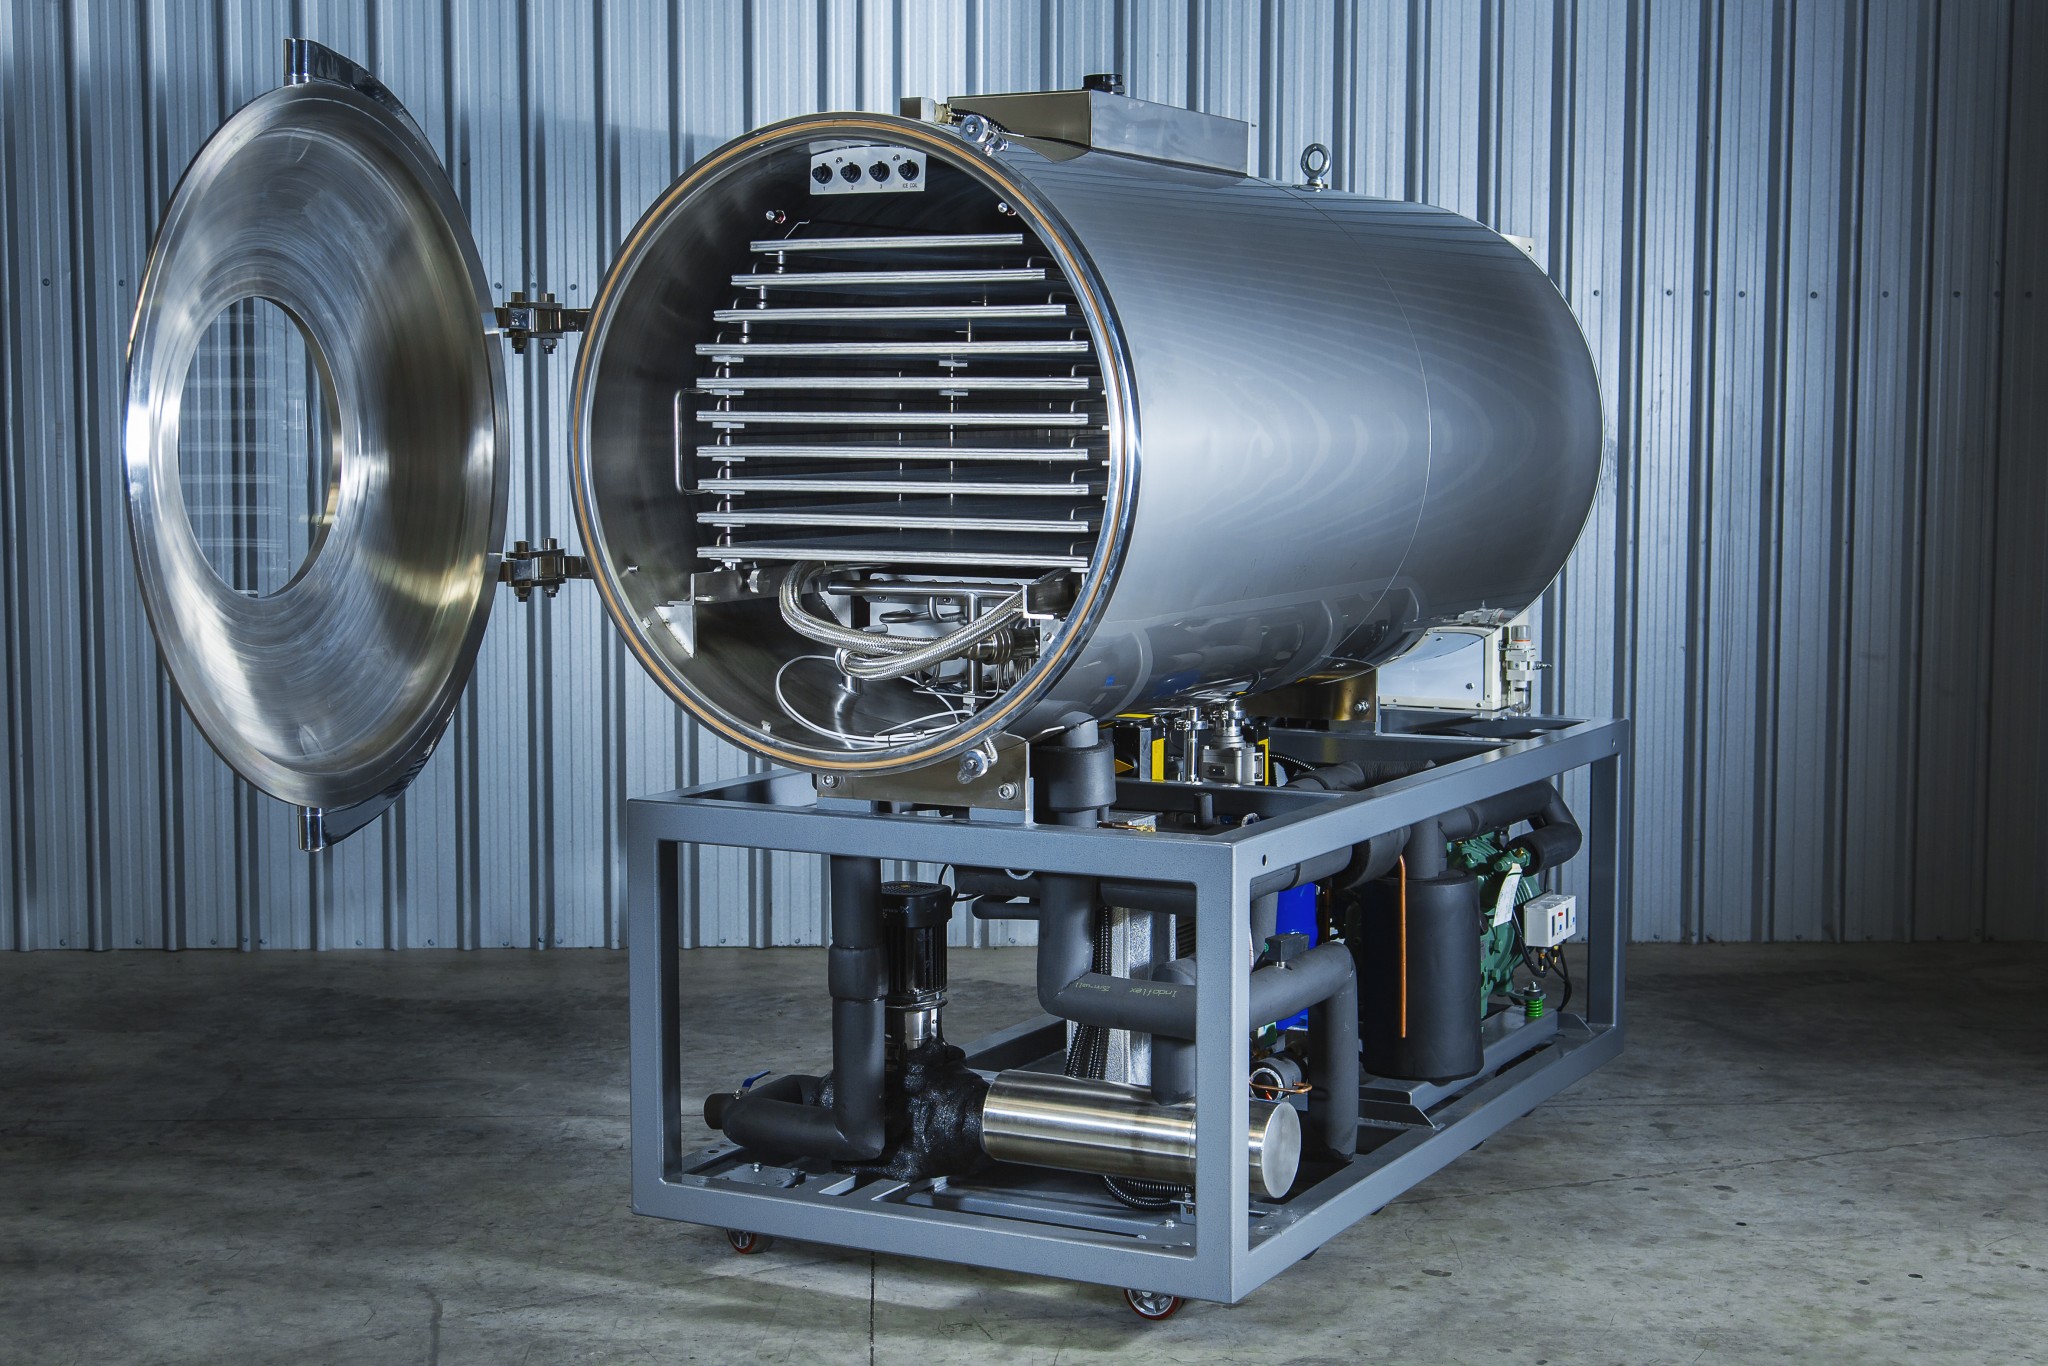 Freeze Drying for Commercial Emergency Supply Sales - San Francisco Bay Area